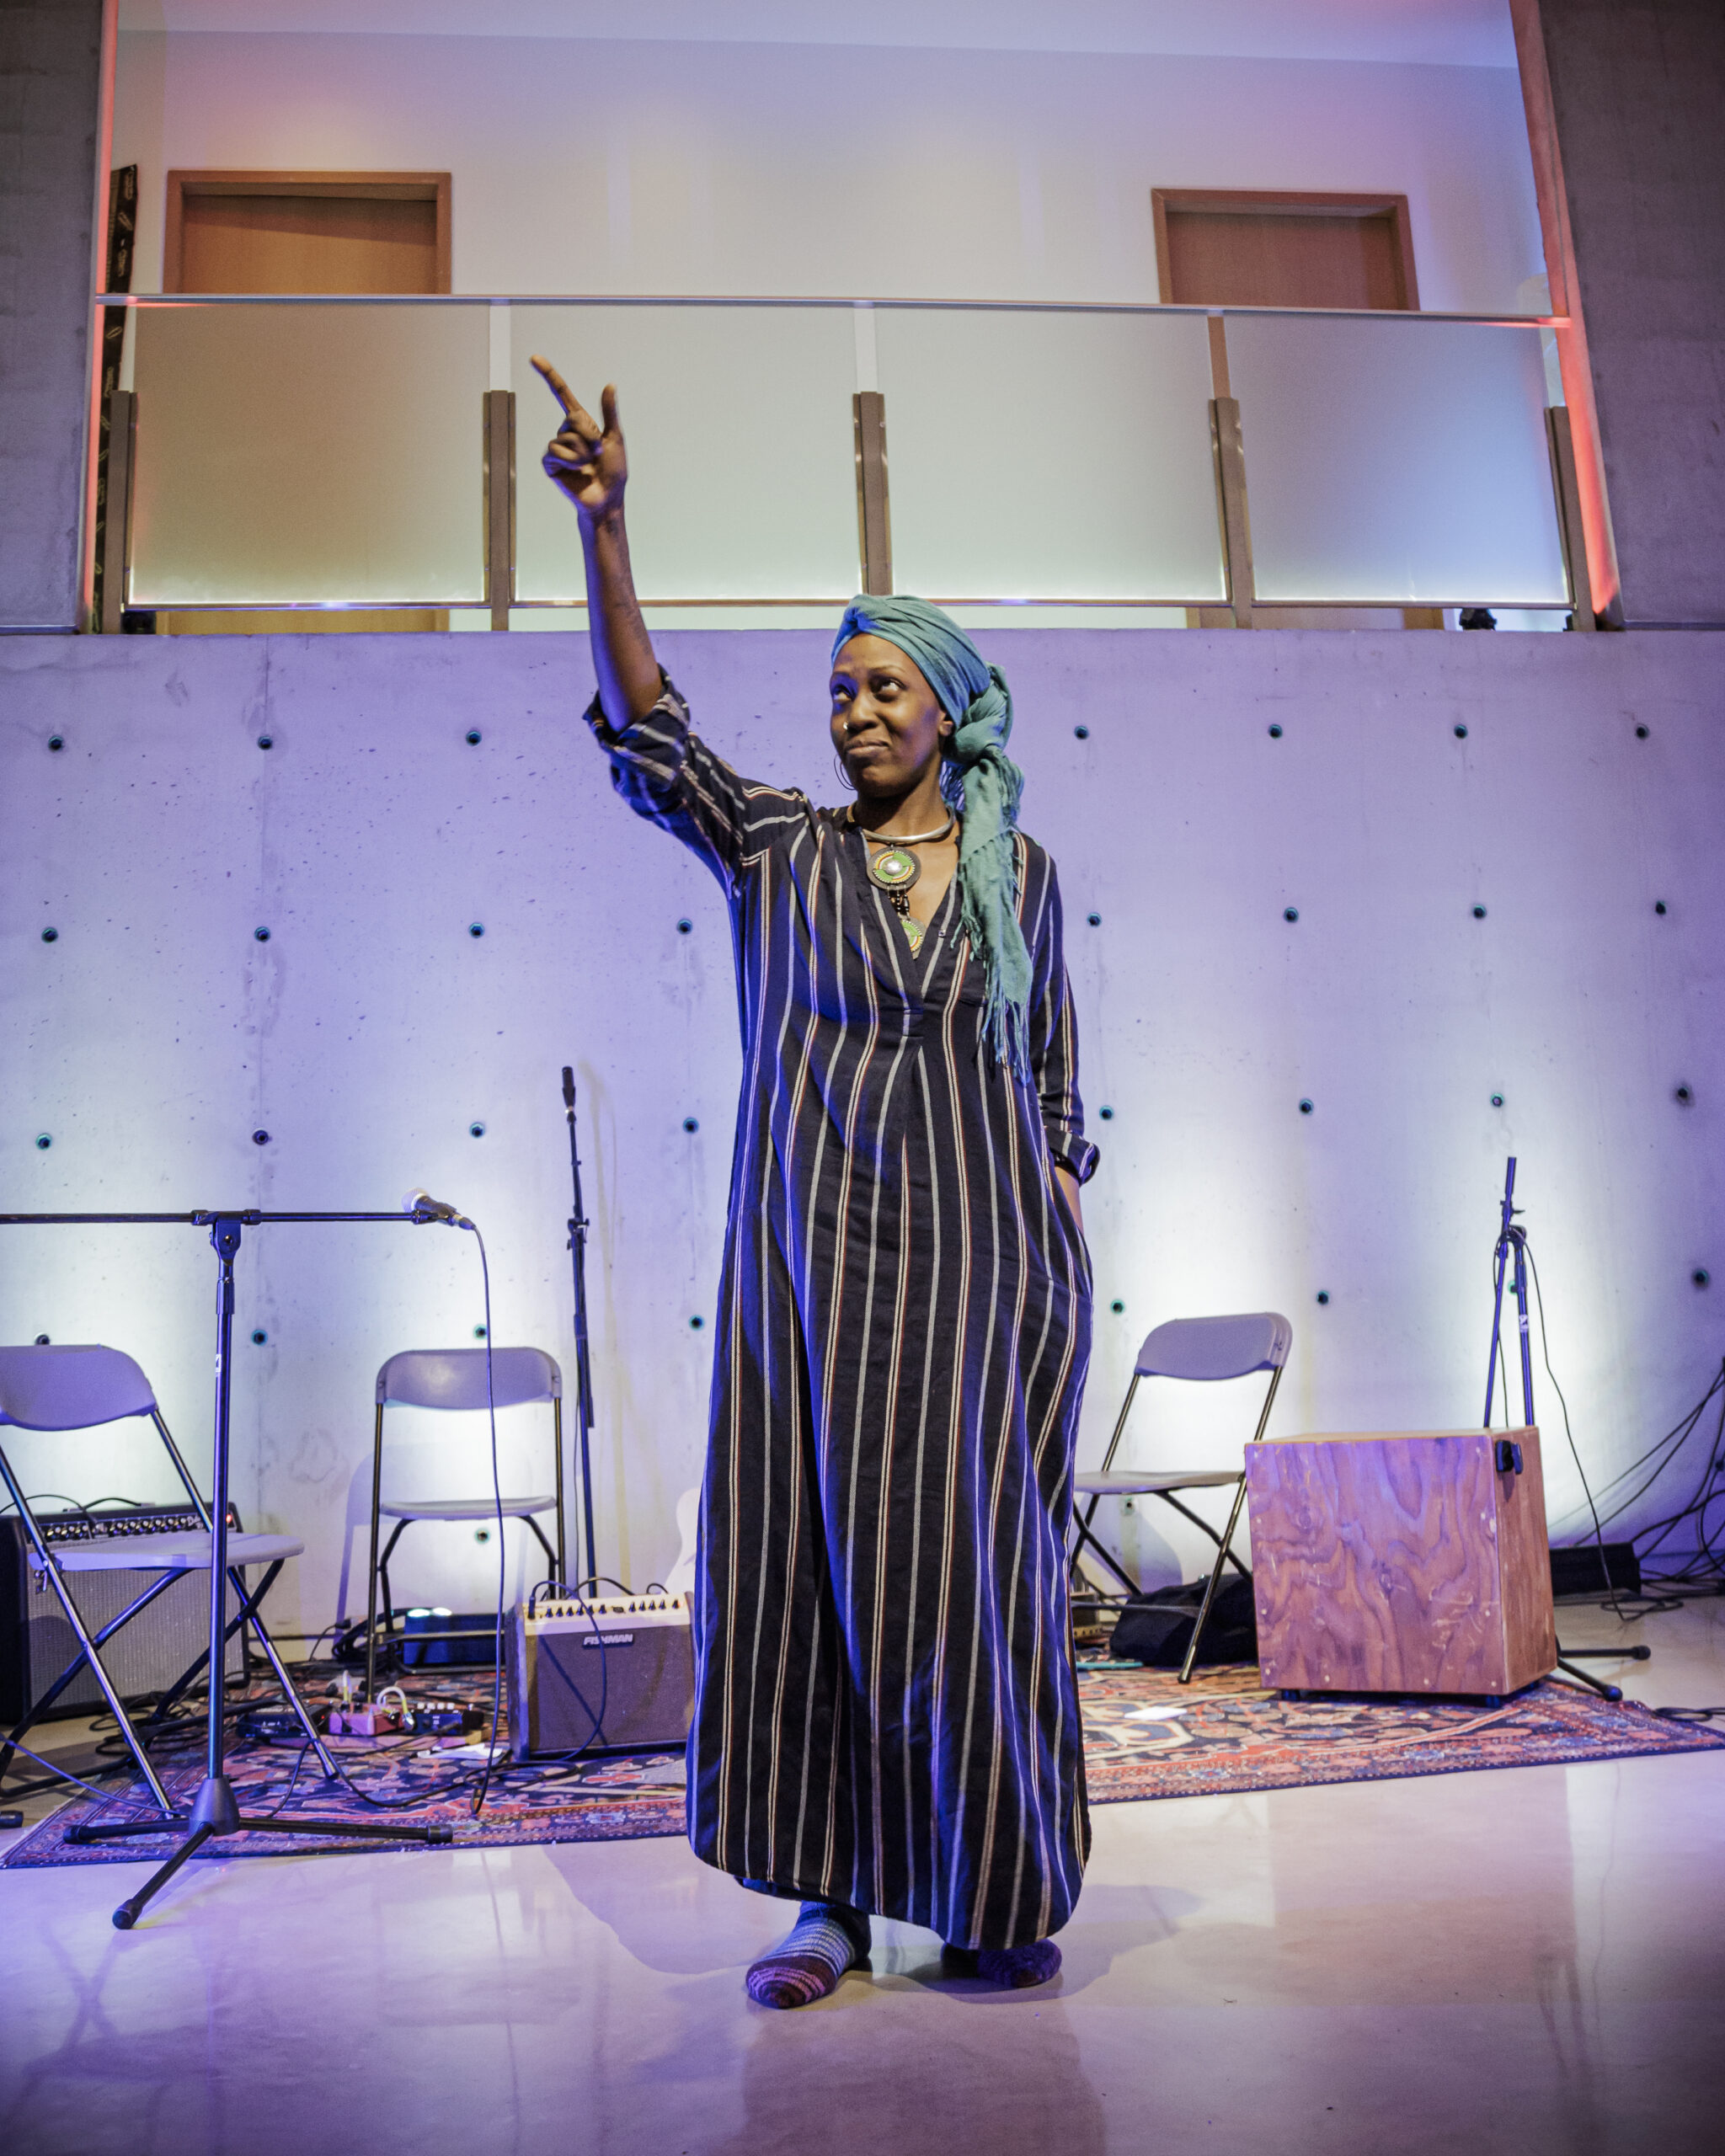 Tony standing on a stage with a few chairs and sound gear behind them, wearing a long striped dress and turquoise headscarf.